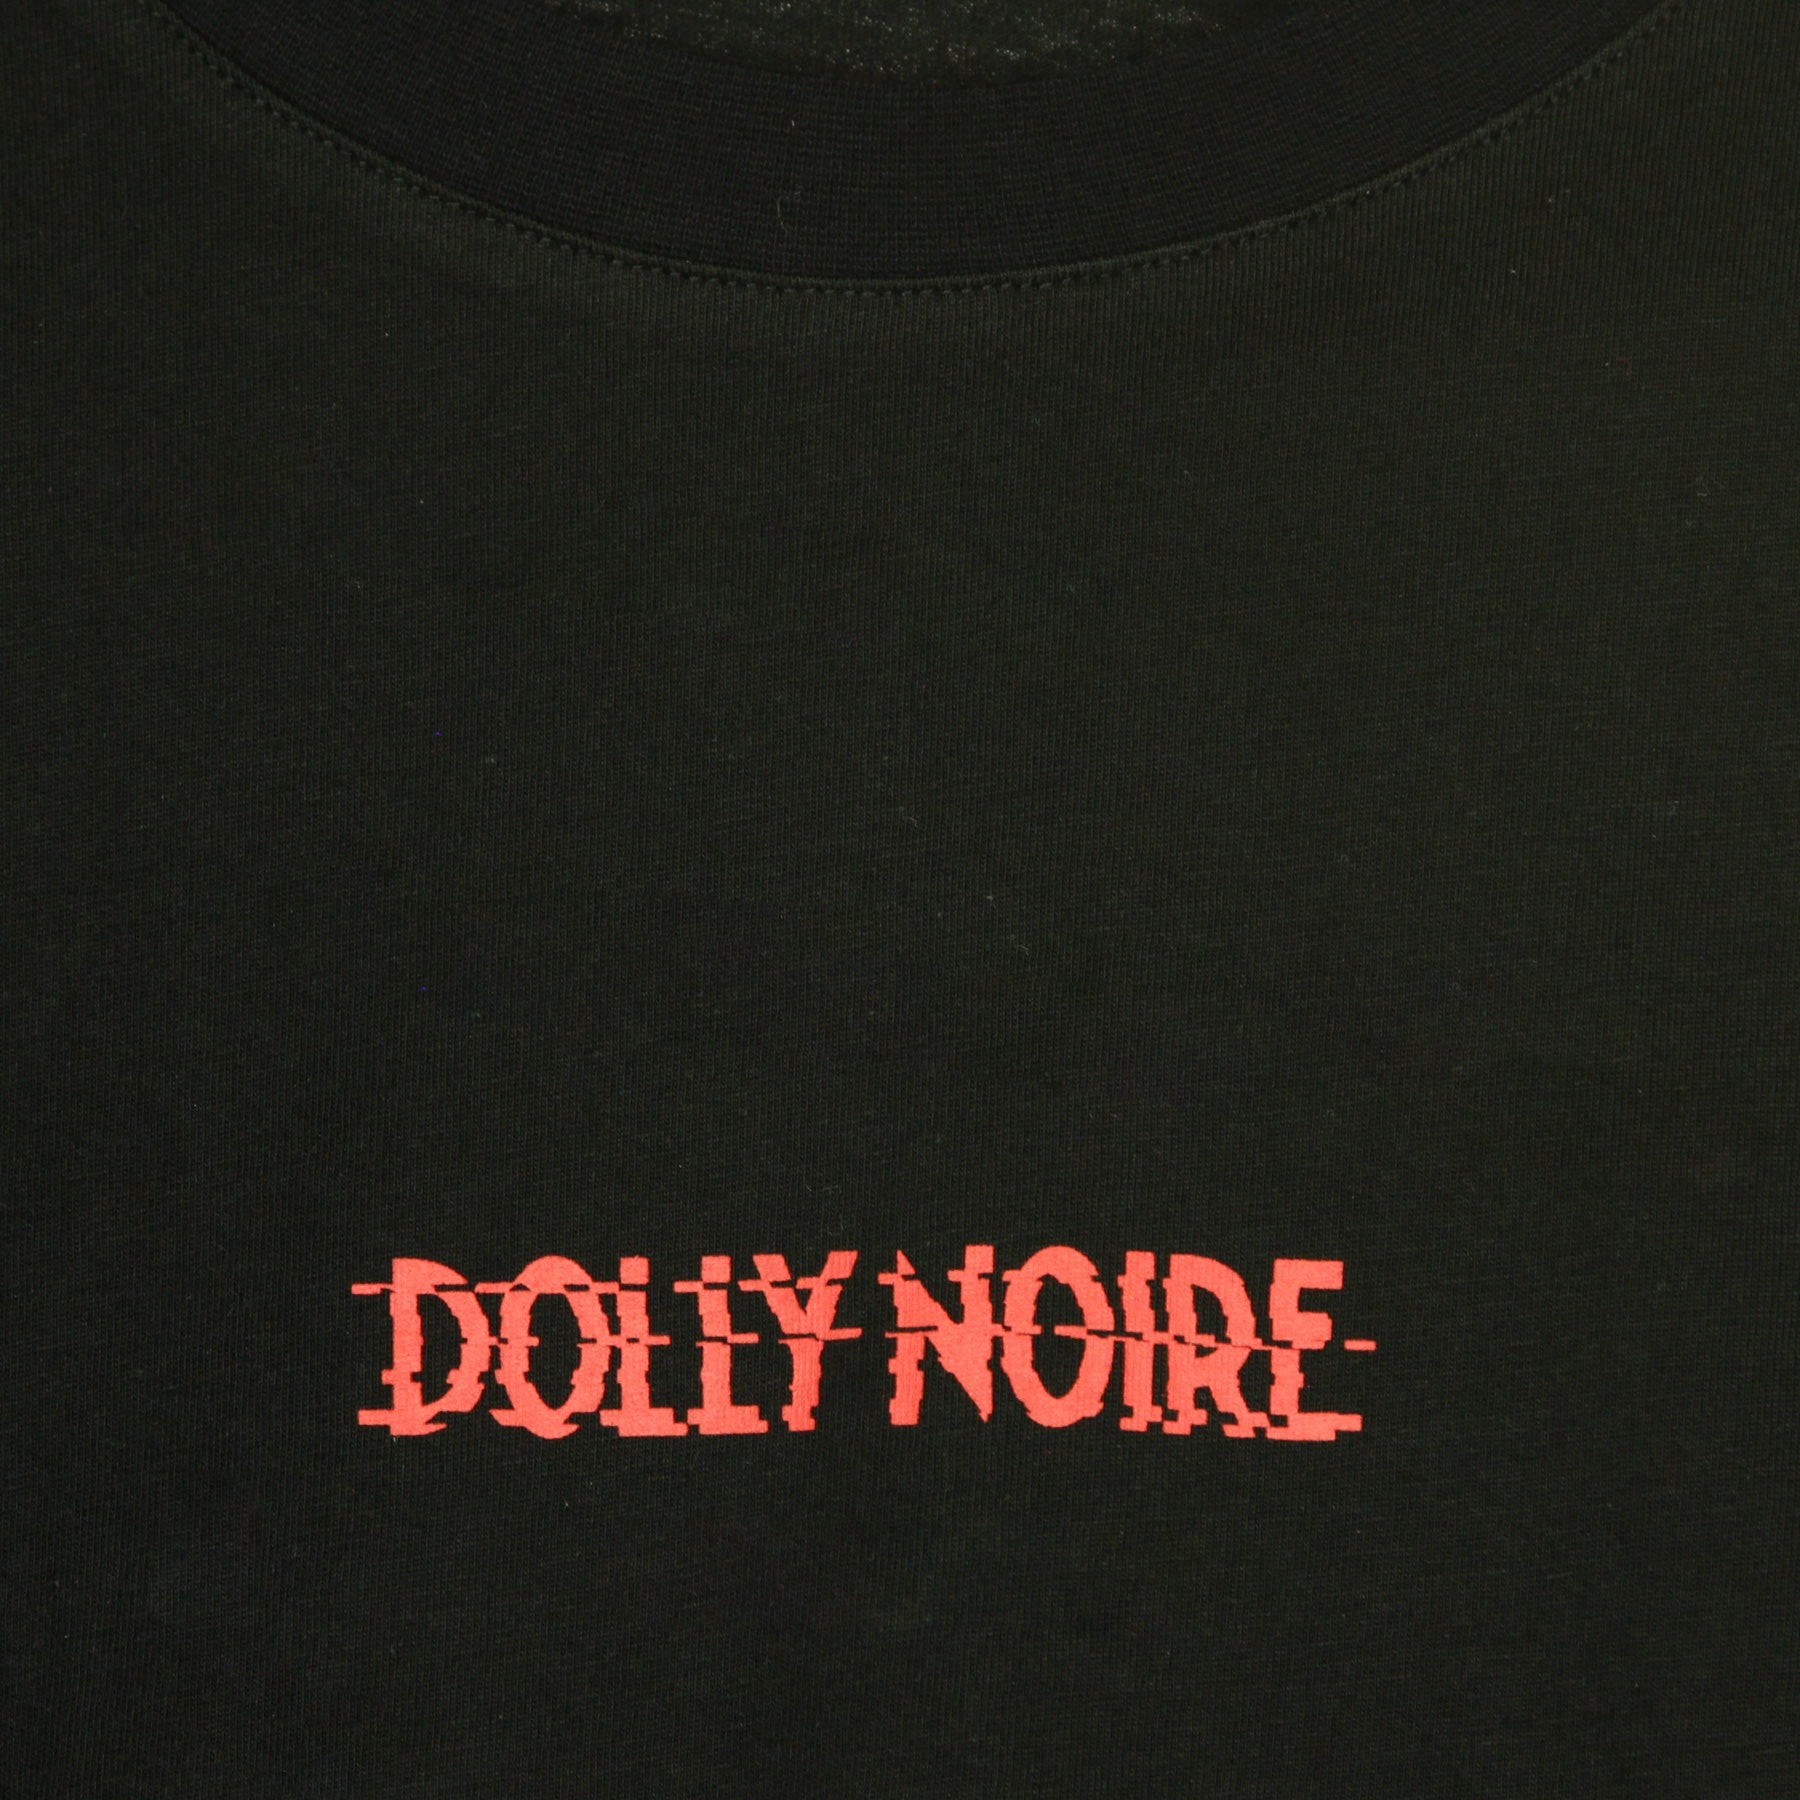 Dolly Noire, Maglietta Corta Donna Capital Black & Red Long Sleeves Over, 